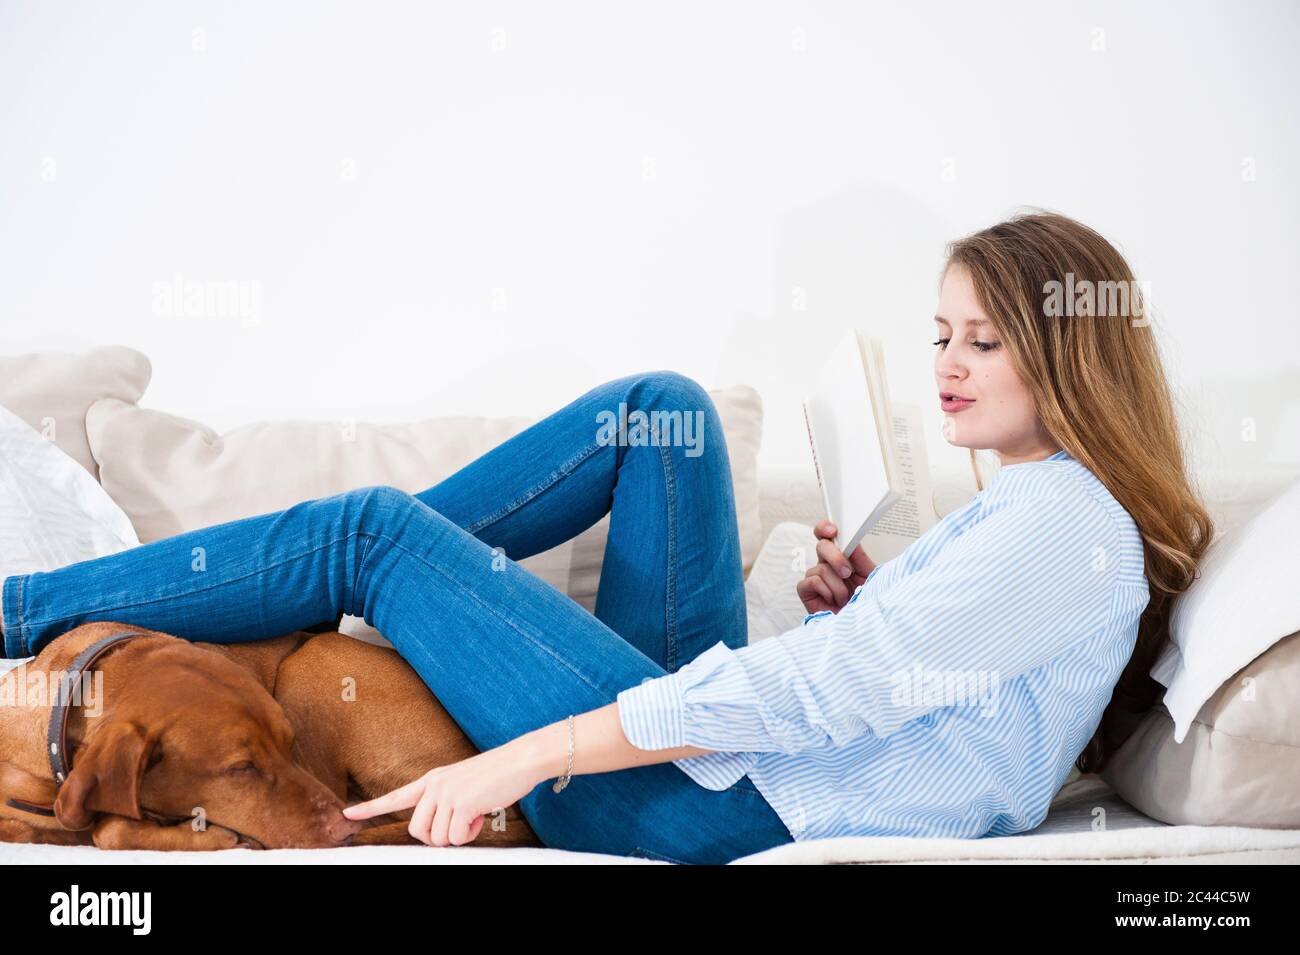 Playful young woman touching dog's snout while sitting with book on sofa at home Stock Photo